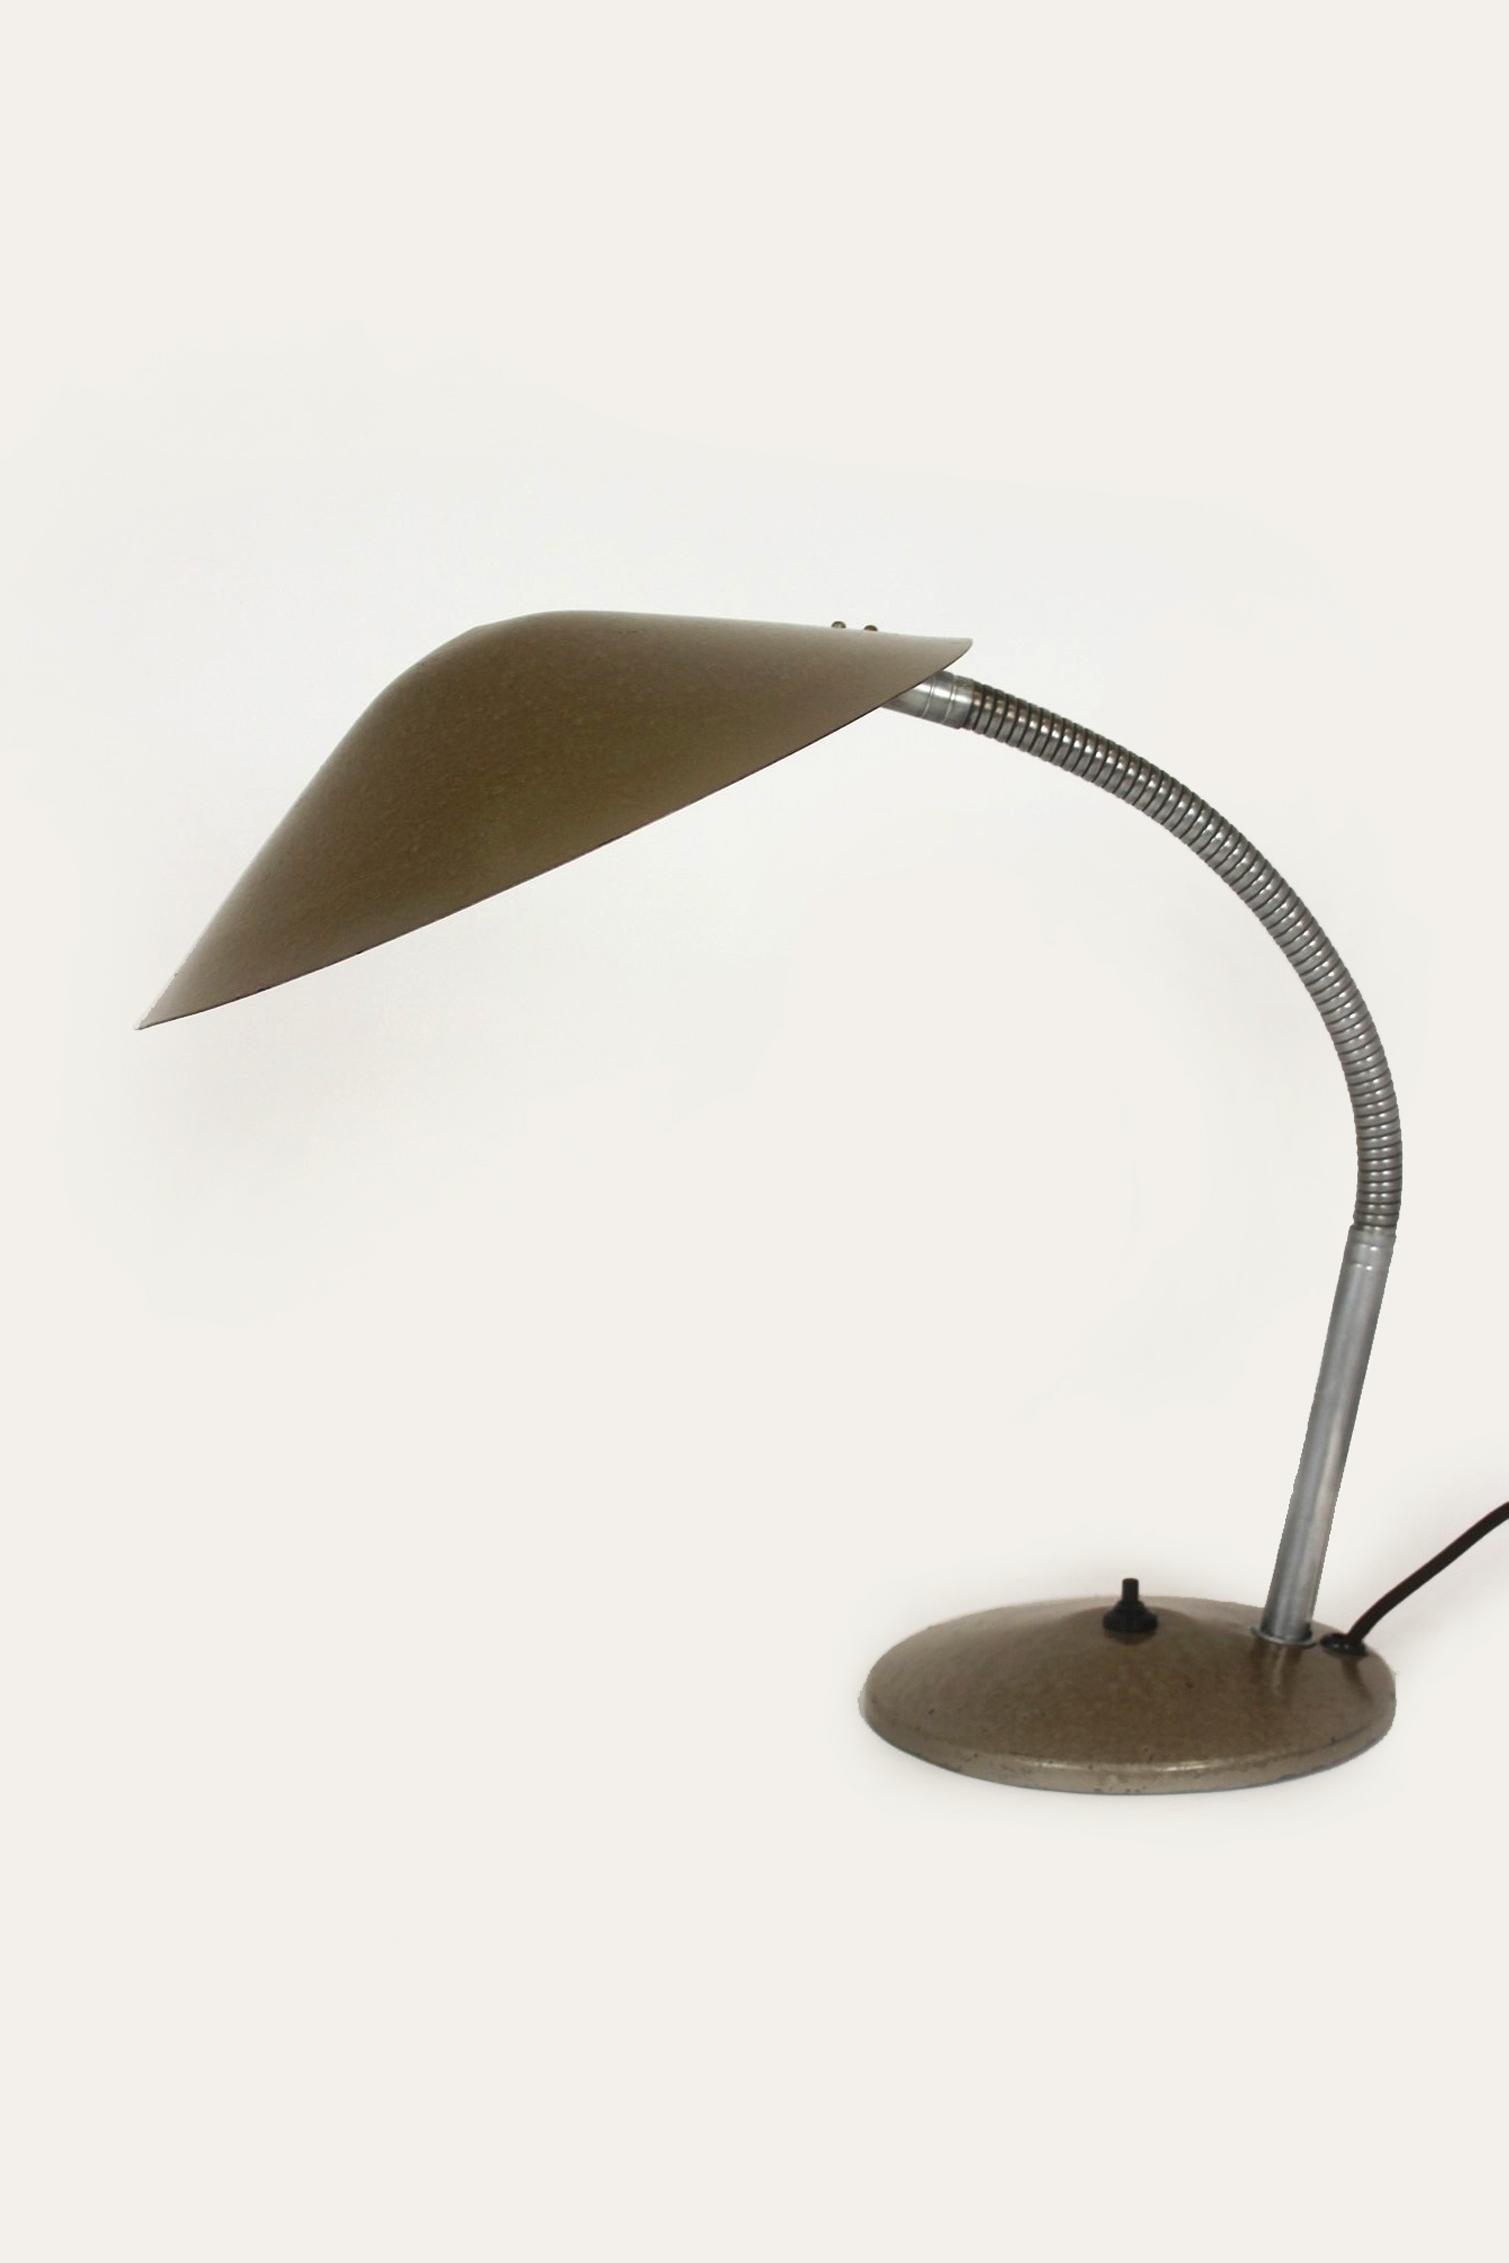 This large industrial steel lamp in the Bauhaus style was produced in the Czech Republic in the 1940s. It is in very good condition and fully functional, the lamp arm is adjustable.